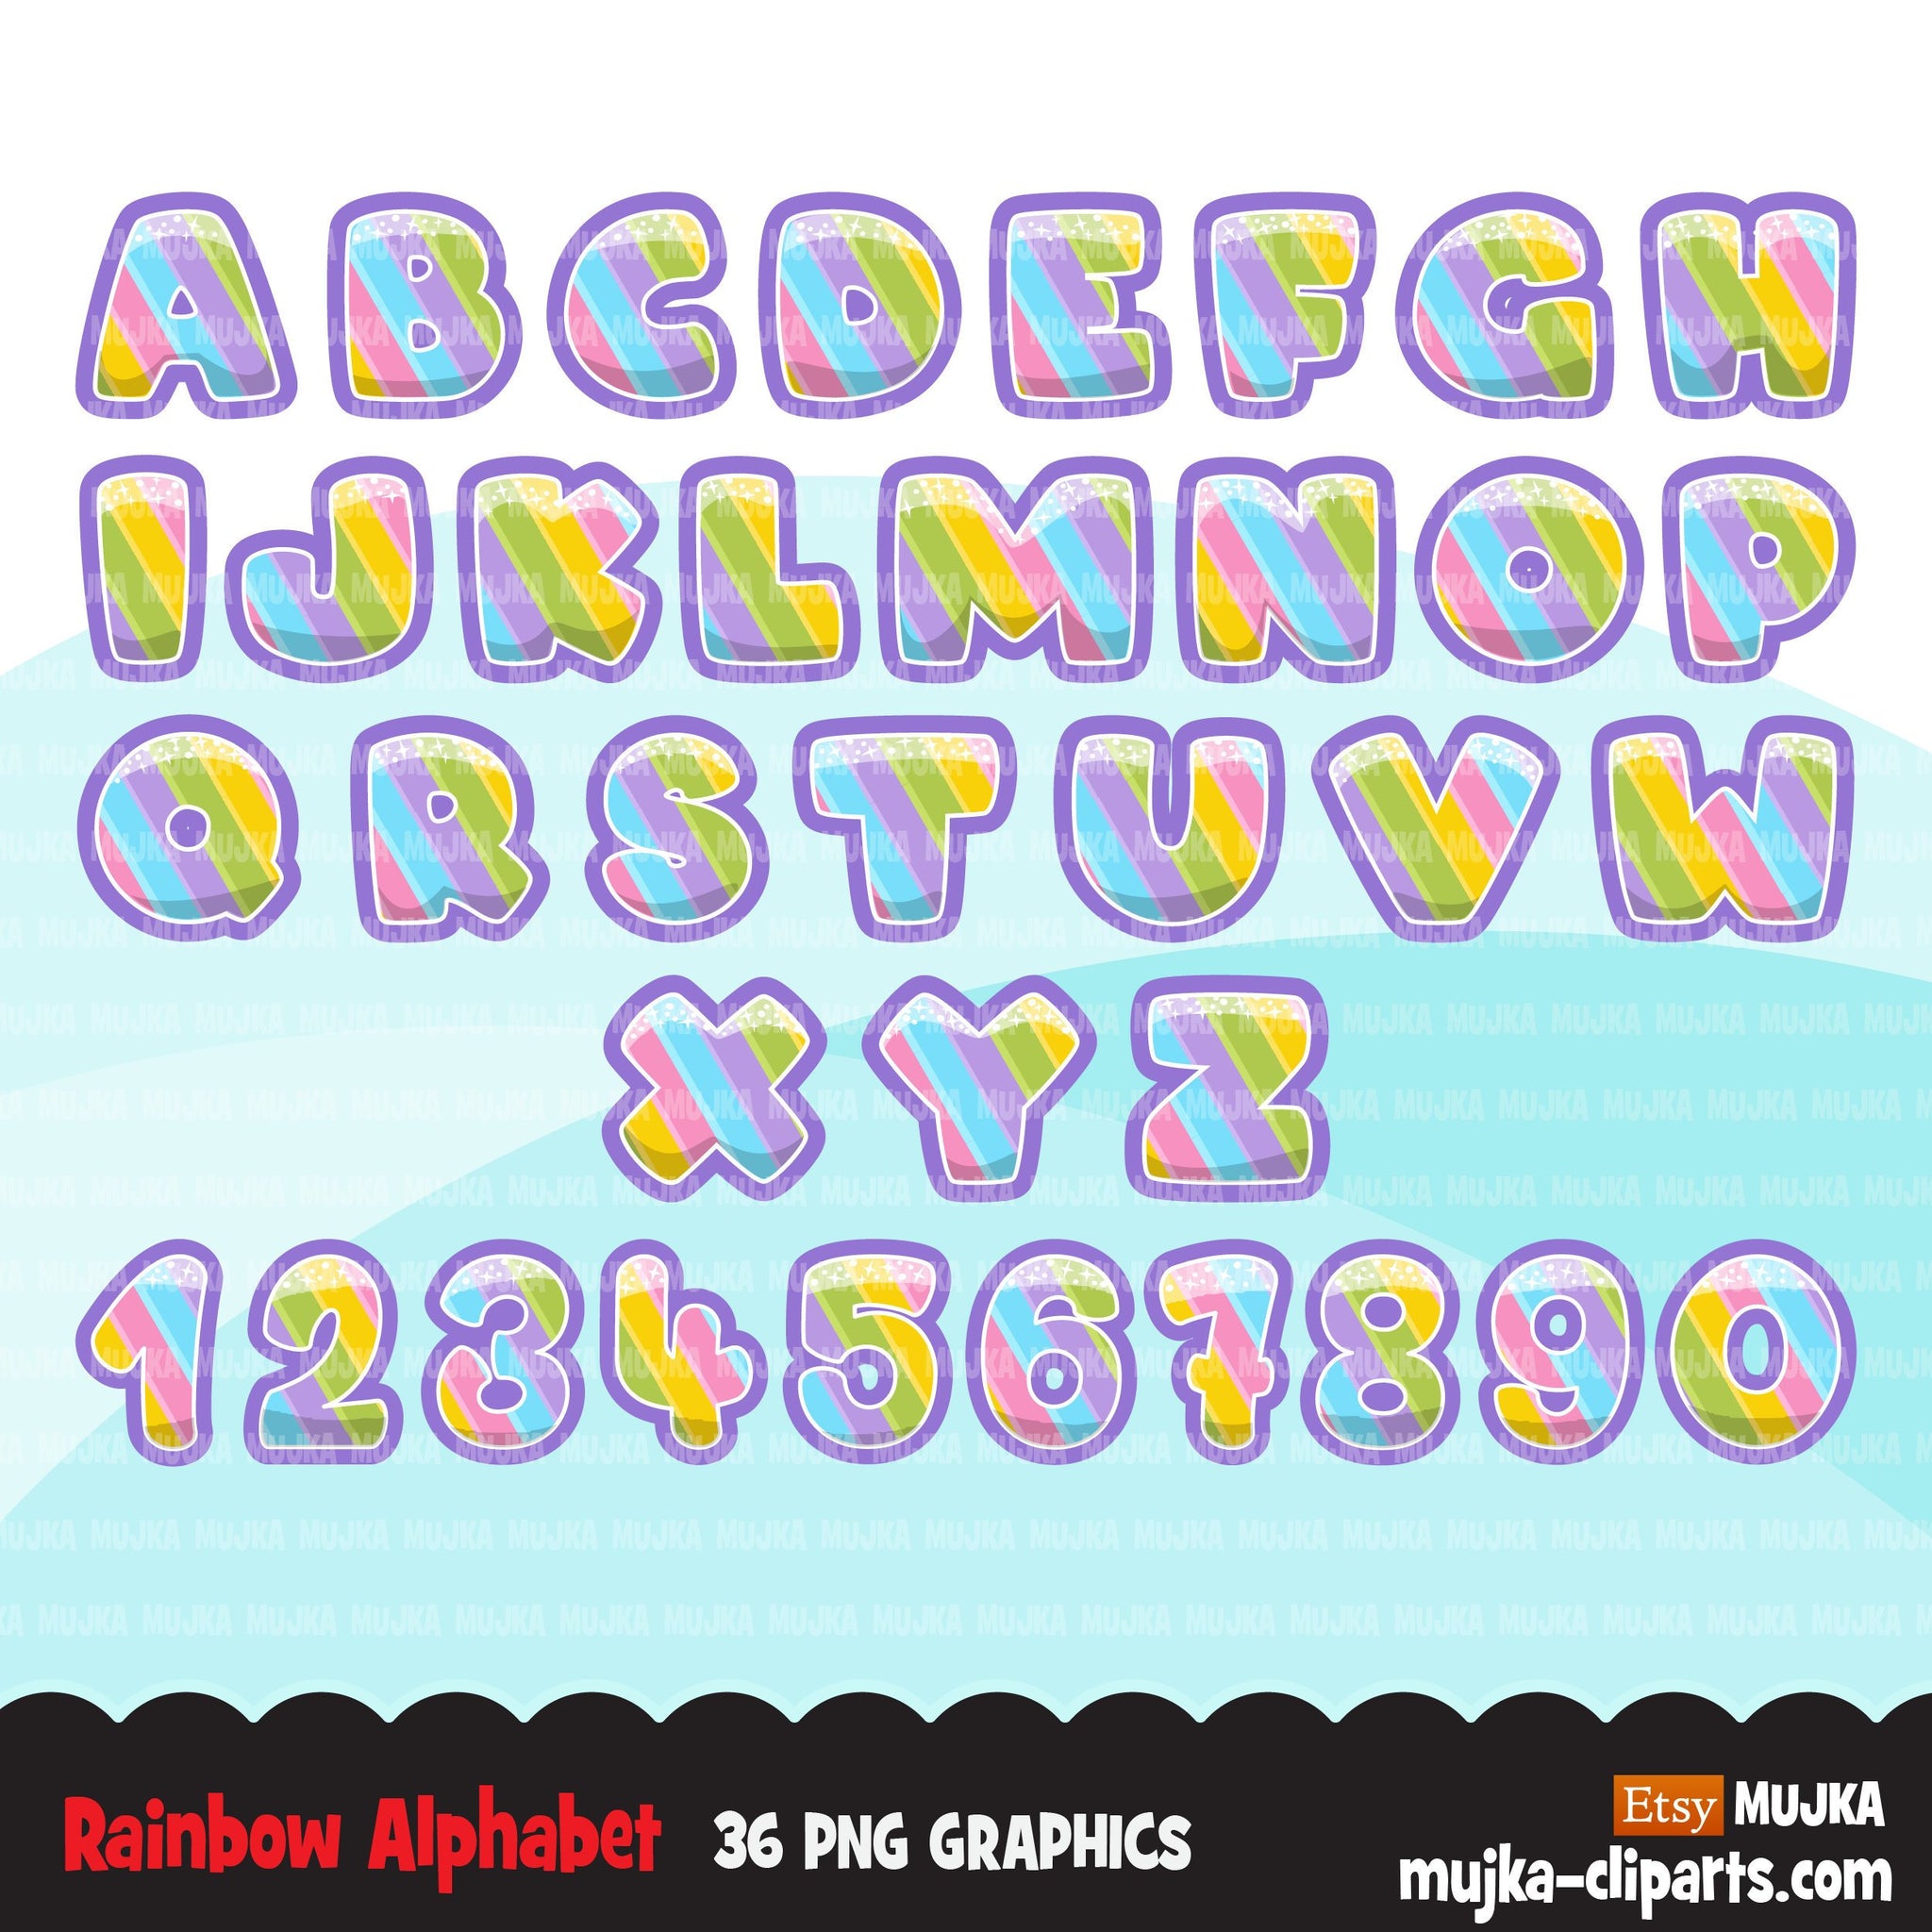 Rainbow Alphabet Clipart, stackable, boy and girl birthday, pastel colors, unicorn, spring, princess, baby shower letters, PNG graphics